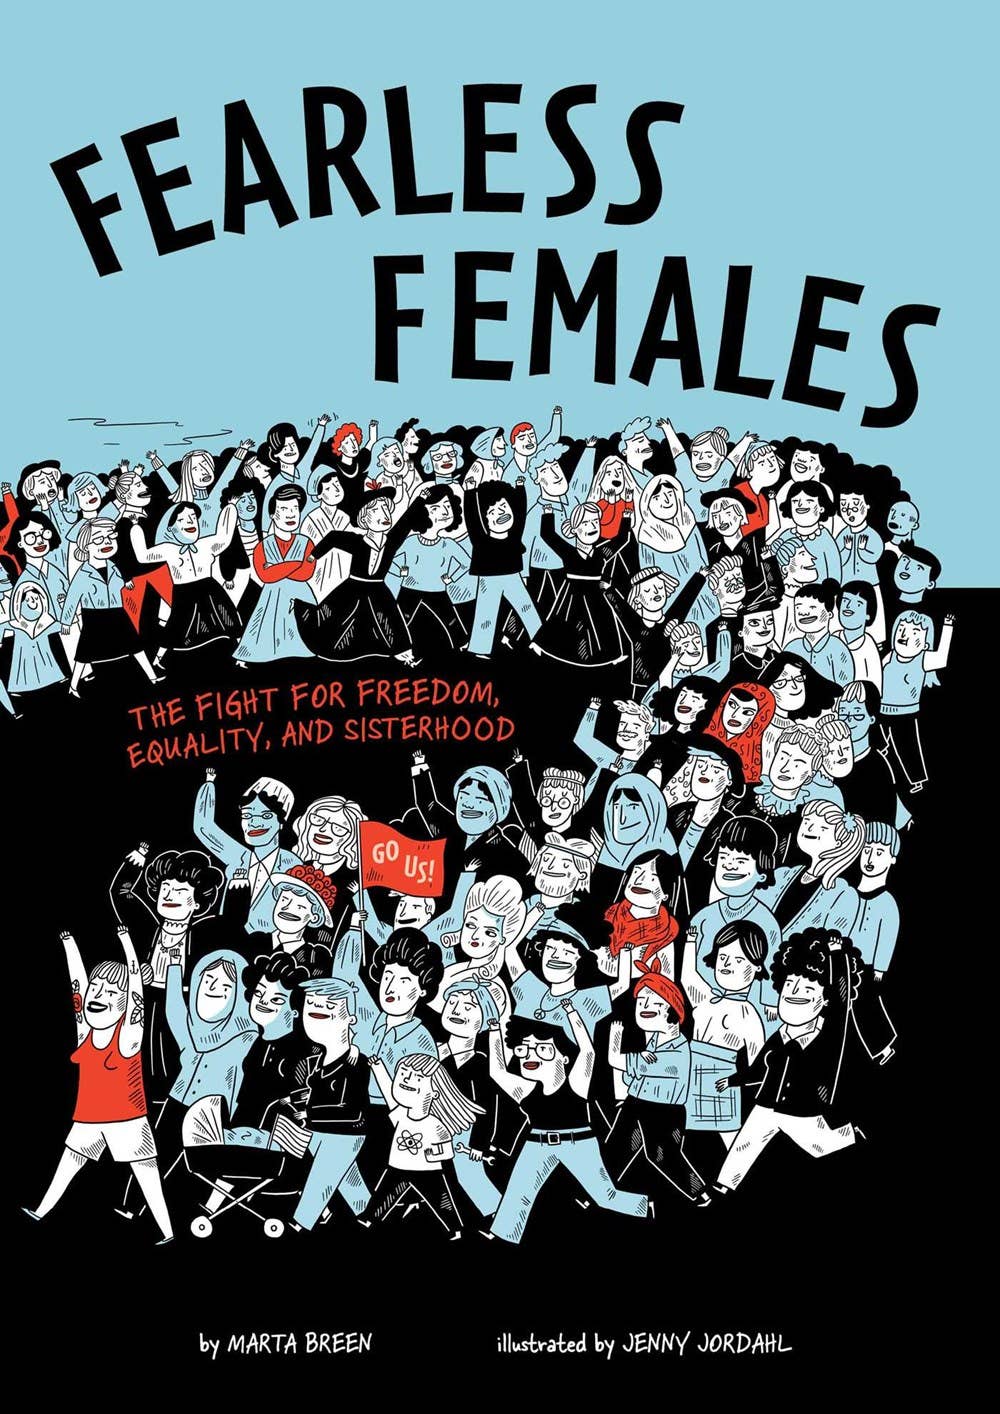 Books: Fearless Females: The Fight for Freedom, Equality and Sisterhood